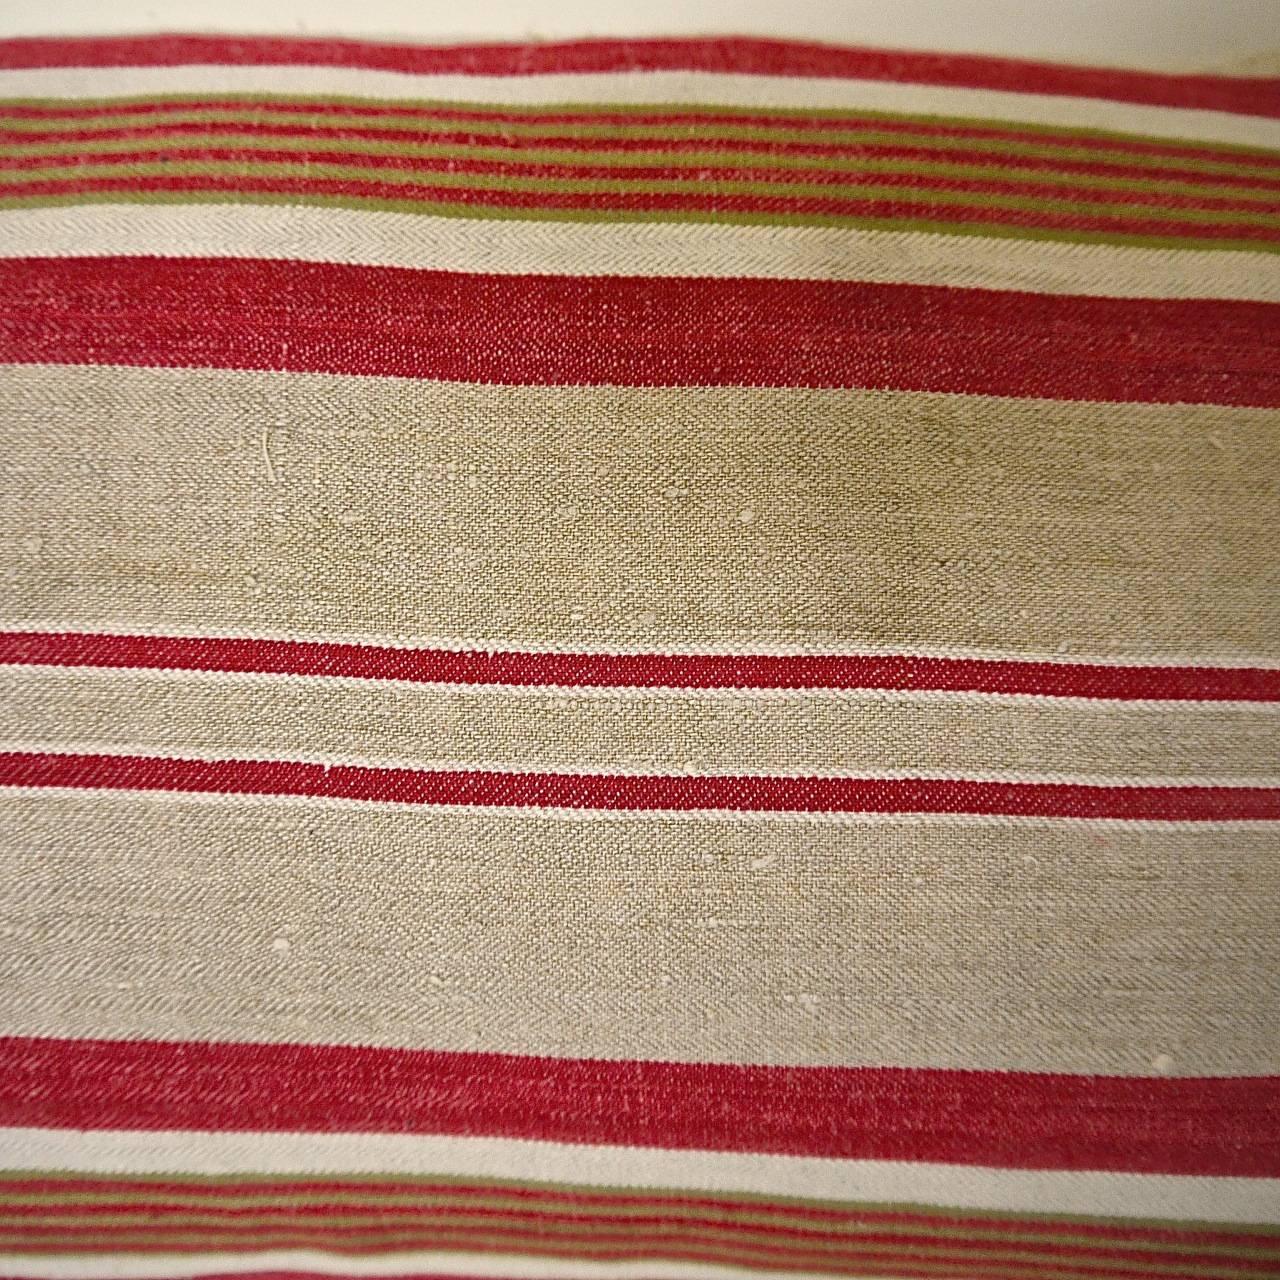 20th Century Antique French Red Beige Green Striped Linen Ticking Pillow